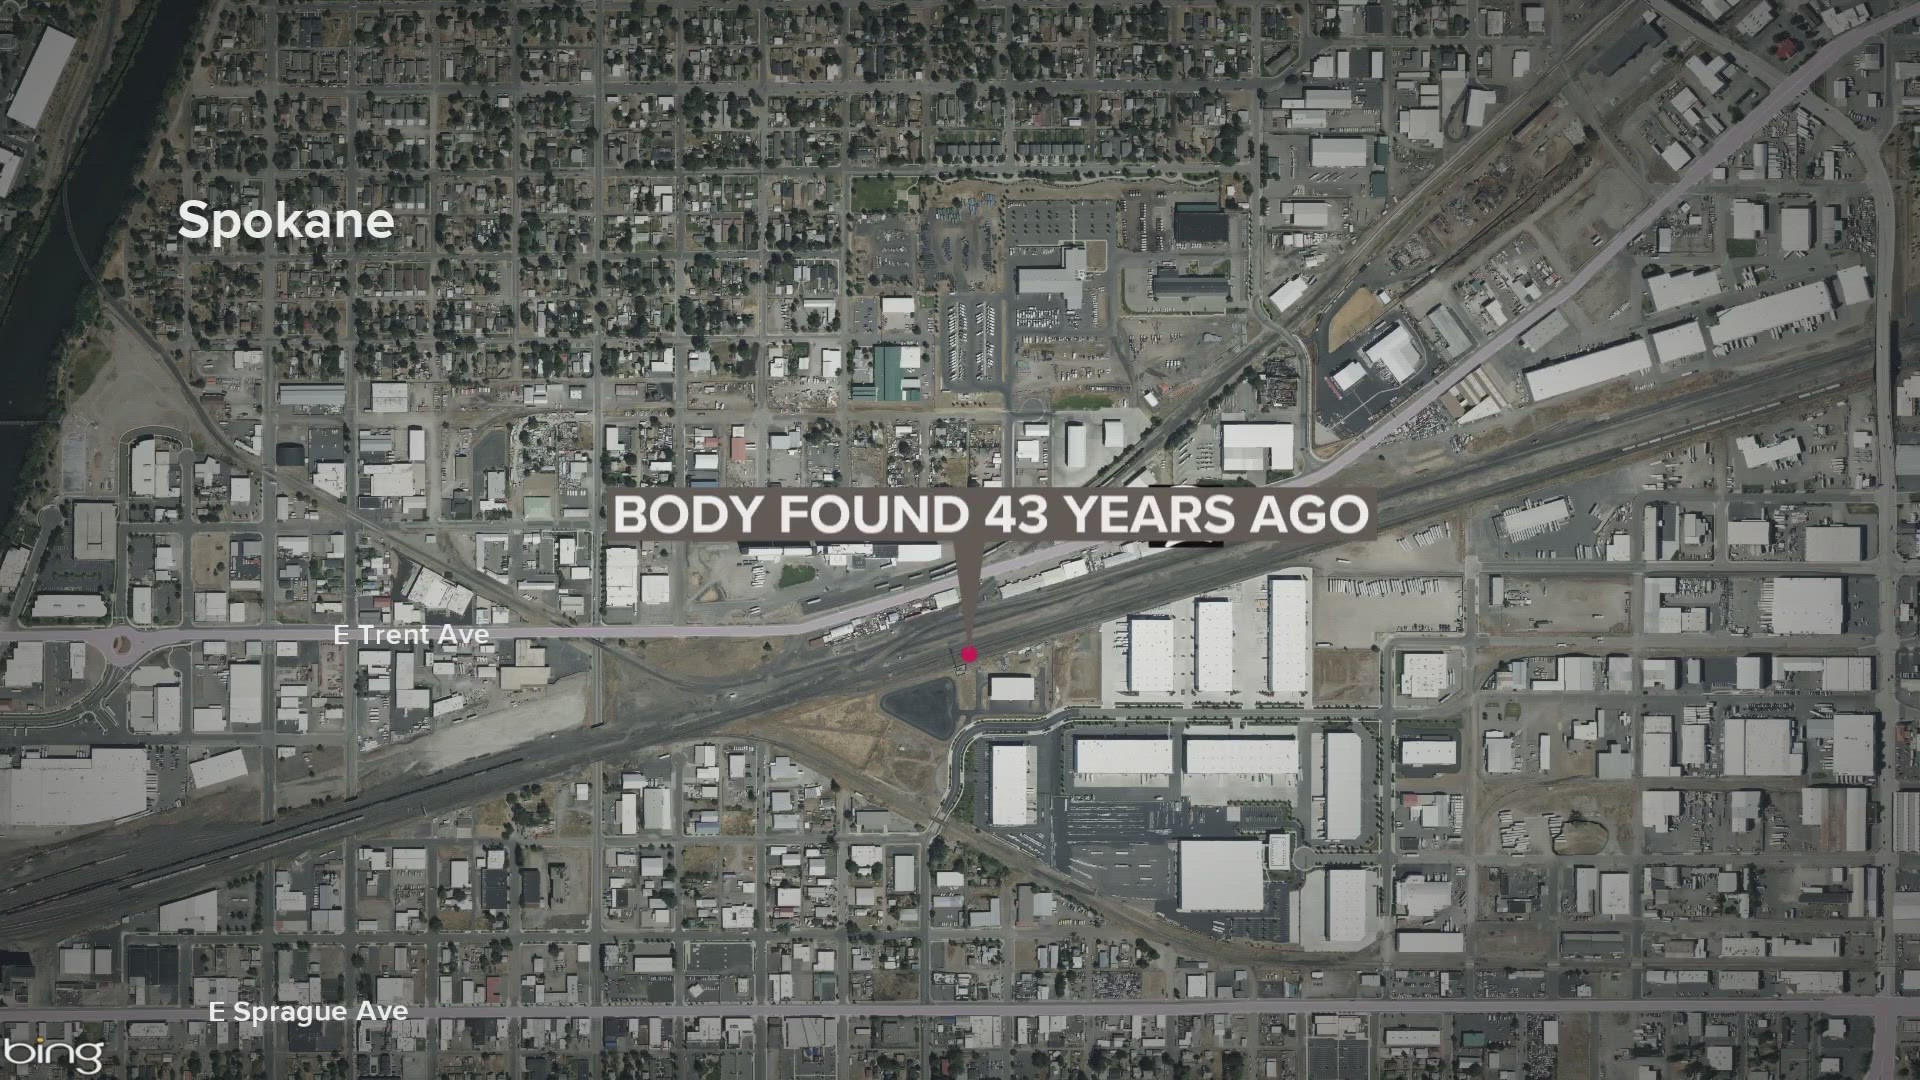 For the second time in the past few months, investigators have used genetic genealogy to identify a body found more than four decades ago.